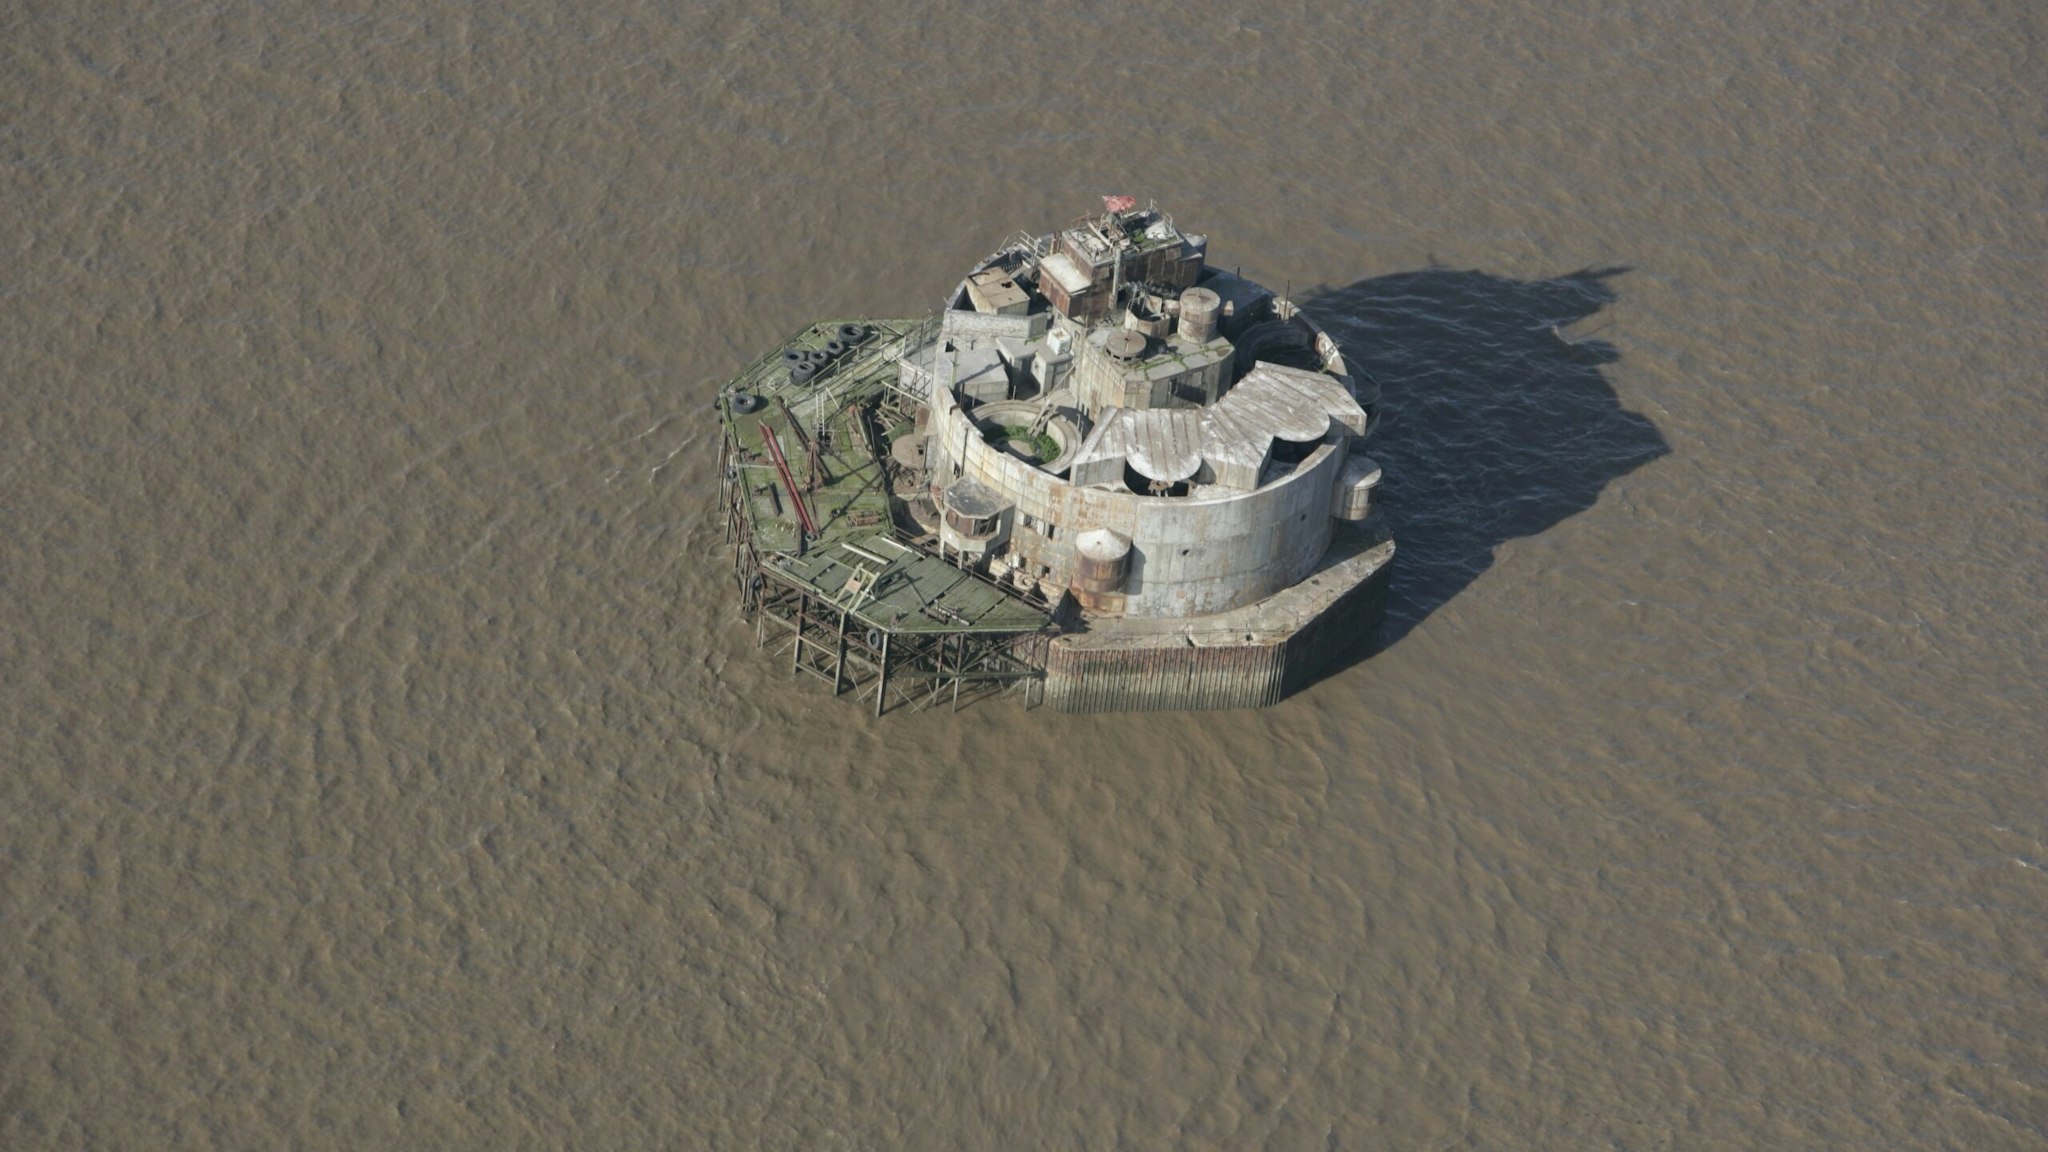 Bull Sand Fort, Humber Estuary, 2006. Aerial view. Standing one and a half miles from shore off Spurn Head on a submerged sandbank, it stands 18 metres high and 25metres in diameter. Bull Sand Fort and its twin Haile Sand Fort were built in 1914 to protect the mouth of the Humber from enemy attack. They were completed just as the First World War broke out. They were also used in the Second World War as anti-aircraft and anti-submarine defences. Artist: Historic England Staff Photographer.